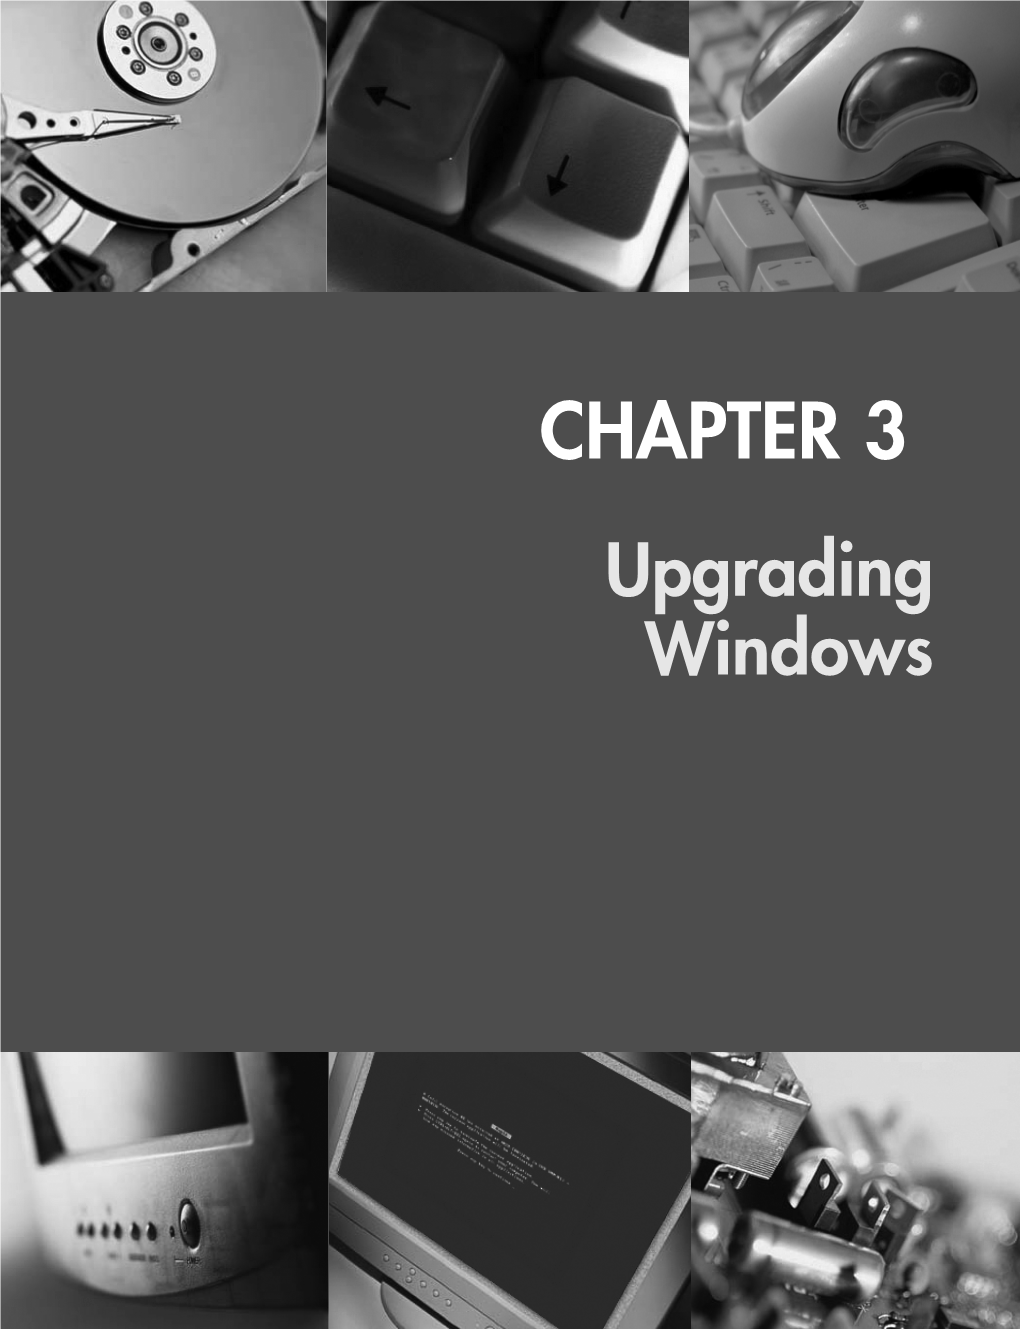 CHAPTER 3 Upgrading Windows 04 0789734036 Ch03.Qxd 11/4/05 12:28 PM Page 90